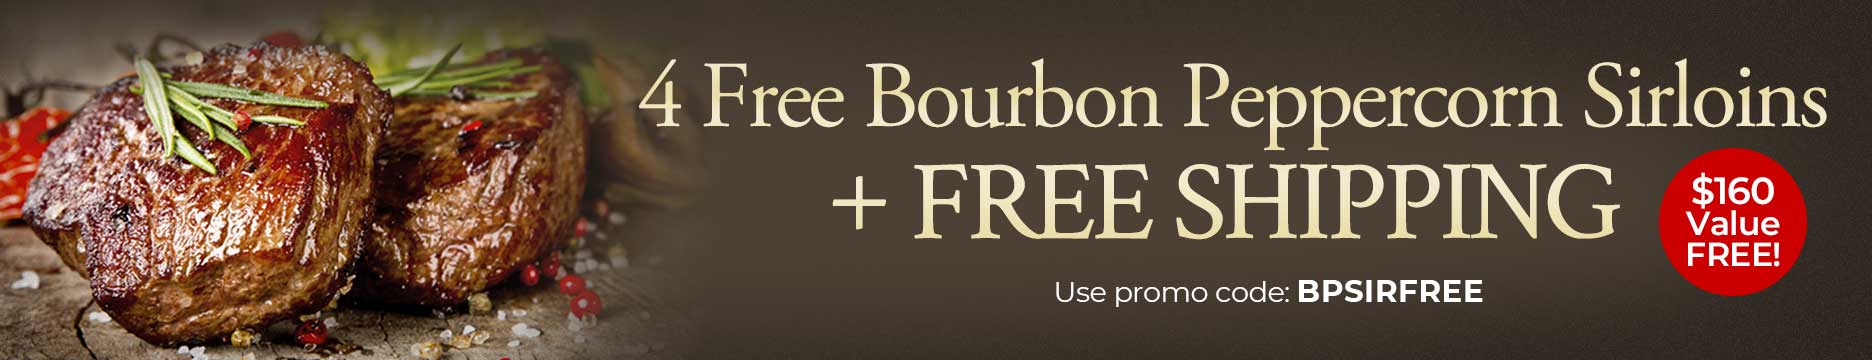 Use Promo Code:BPSIRFREE to receive 4 FREE Bourbon Peppercorn Top Sirloins Plus FREE Shipping on orders of $199+.